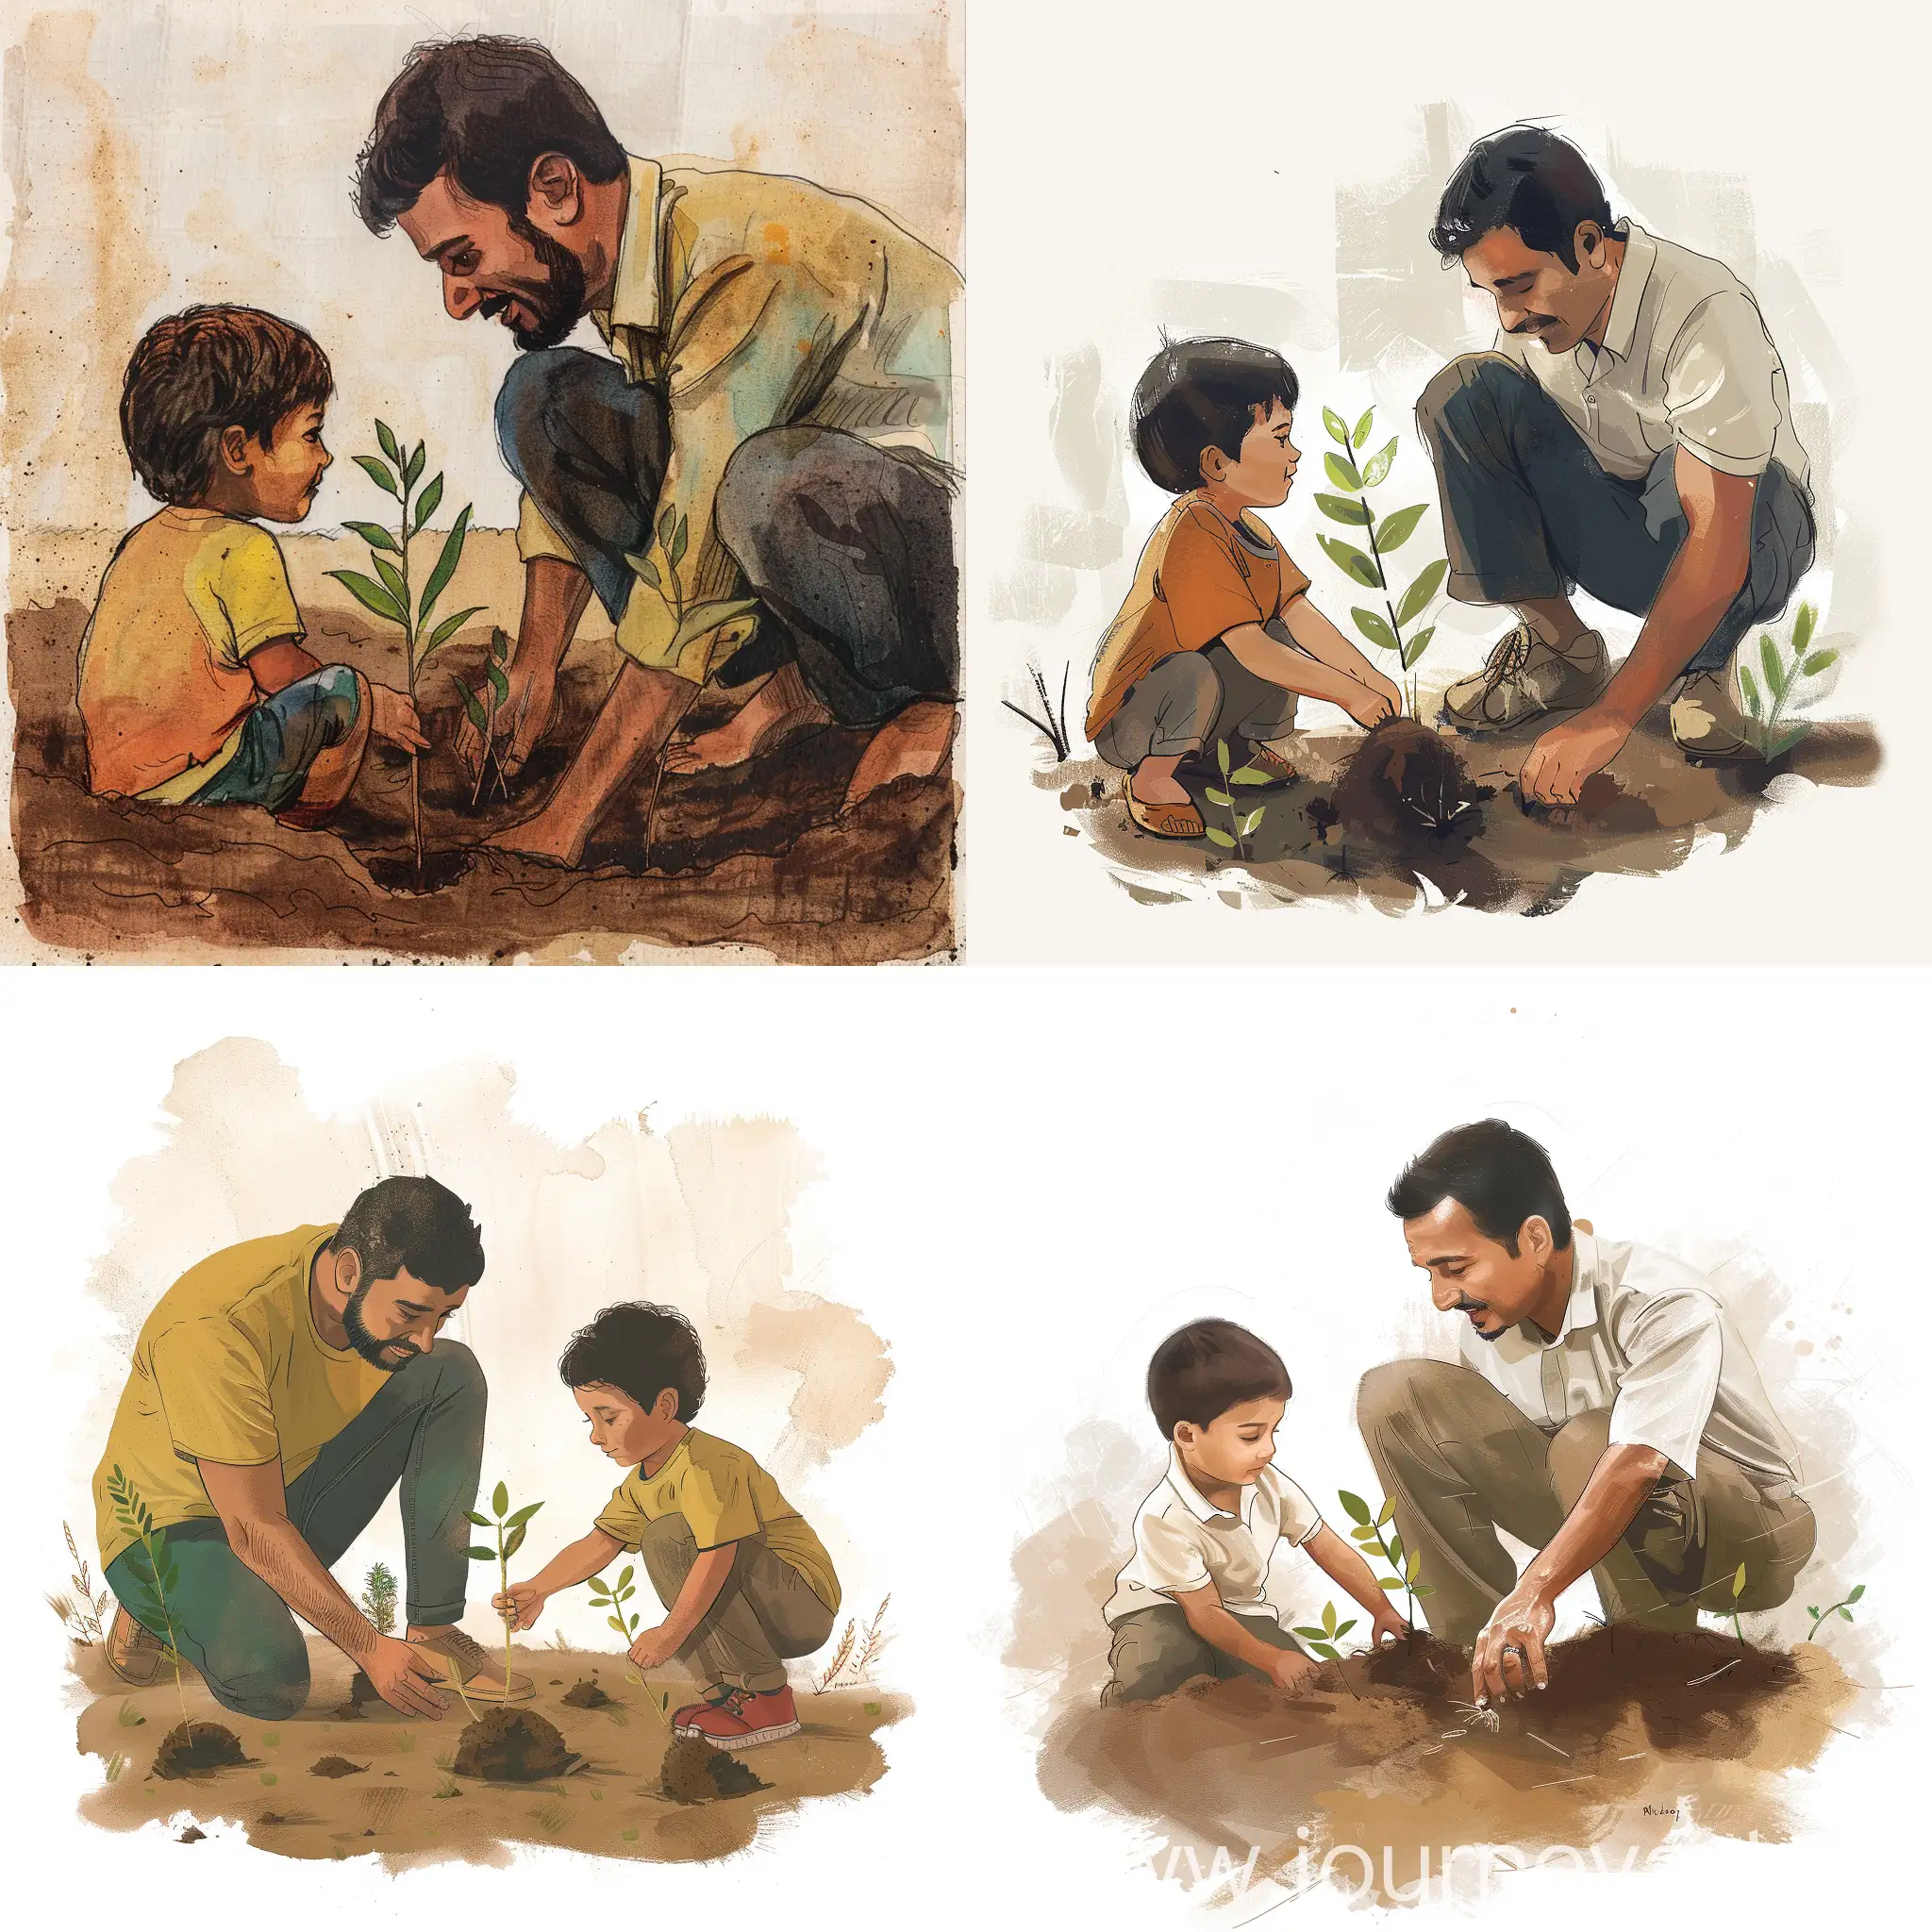 A father and his 5 year old son planting saplings into the ground. The father is looking at the plant and the son is proudly looking at his father.